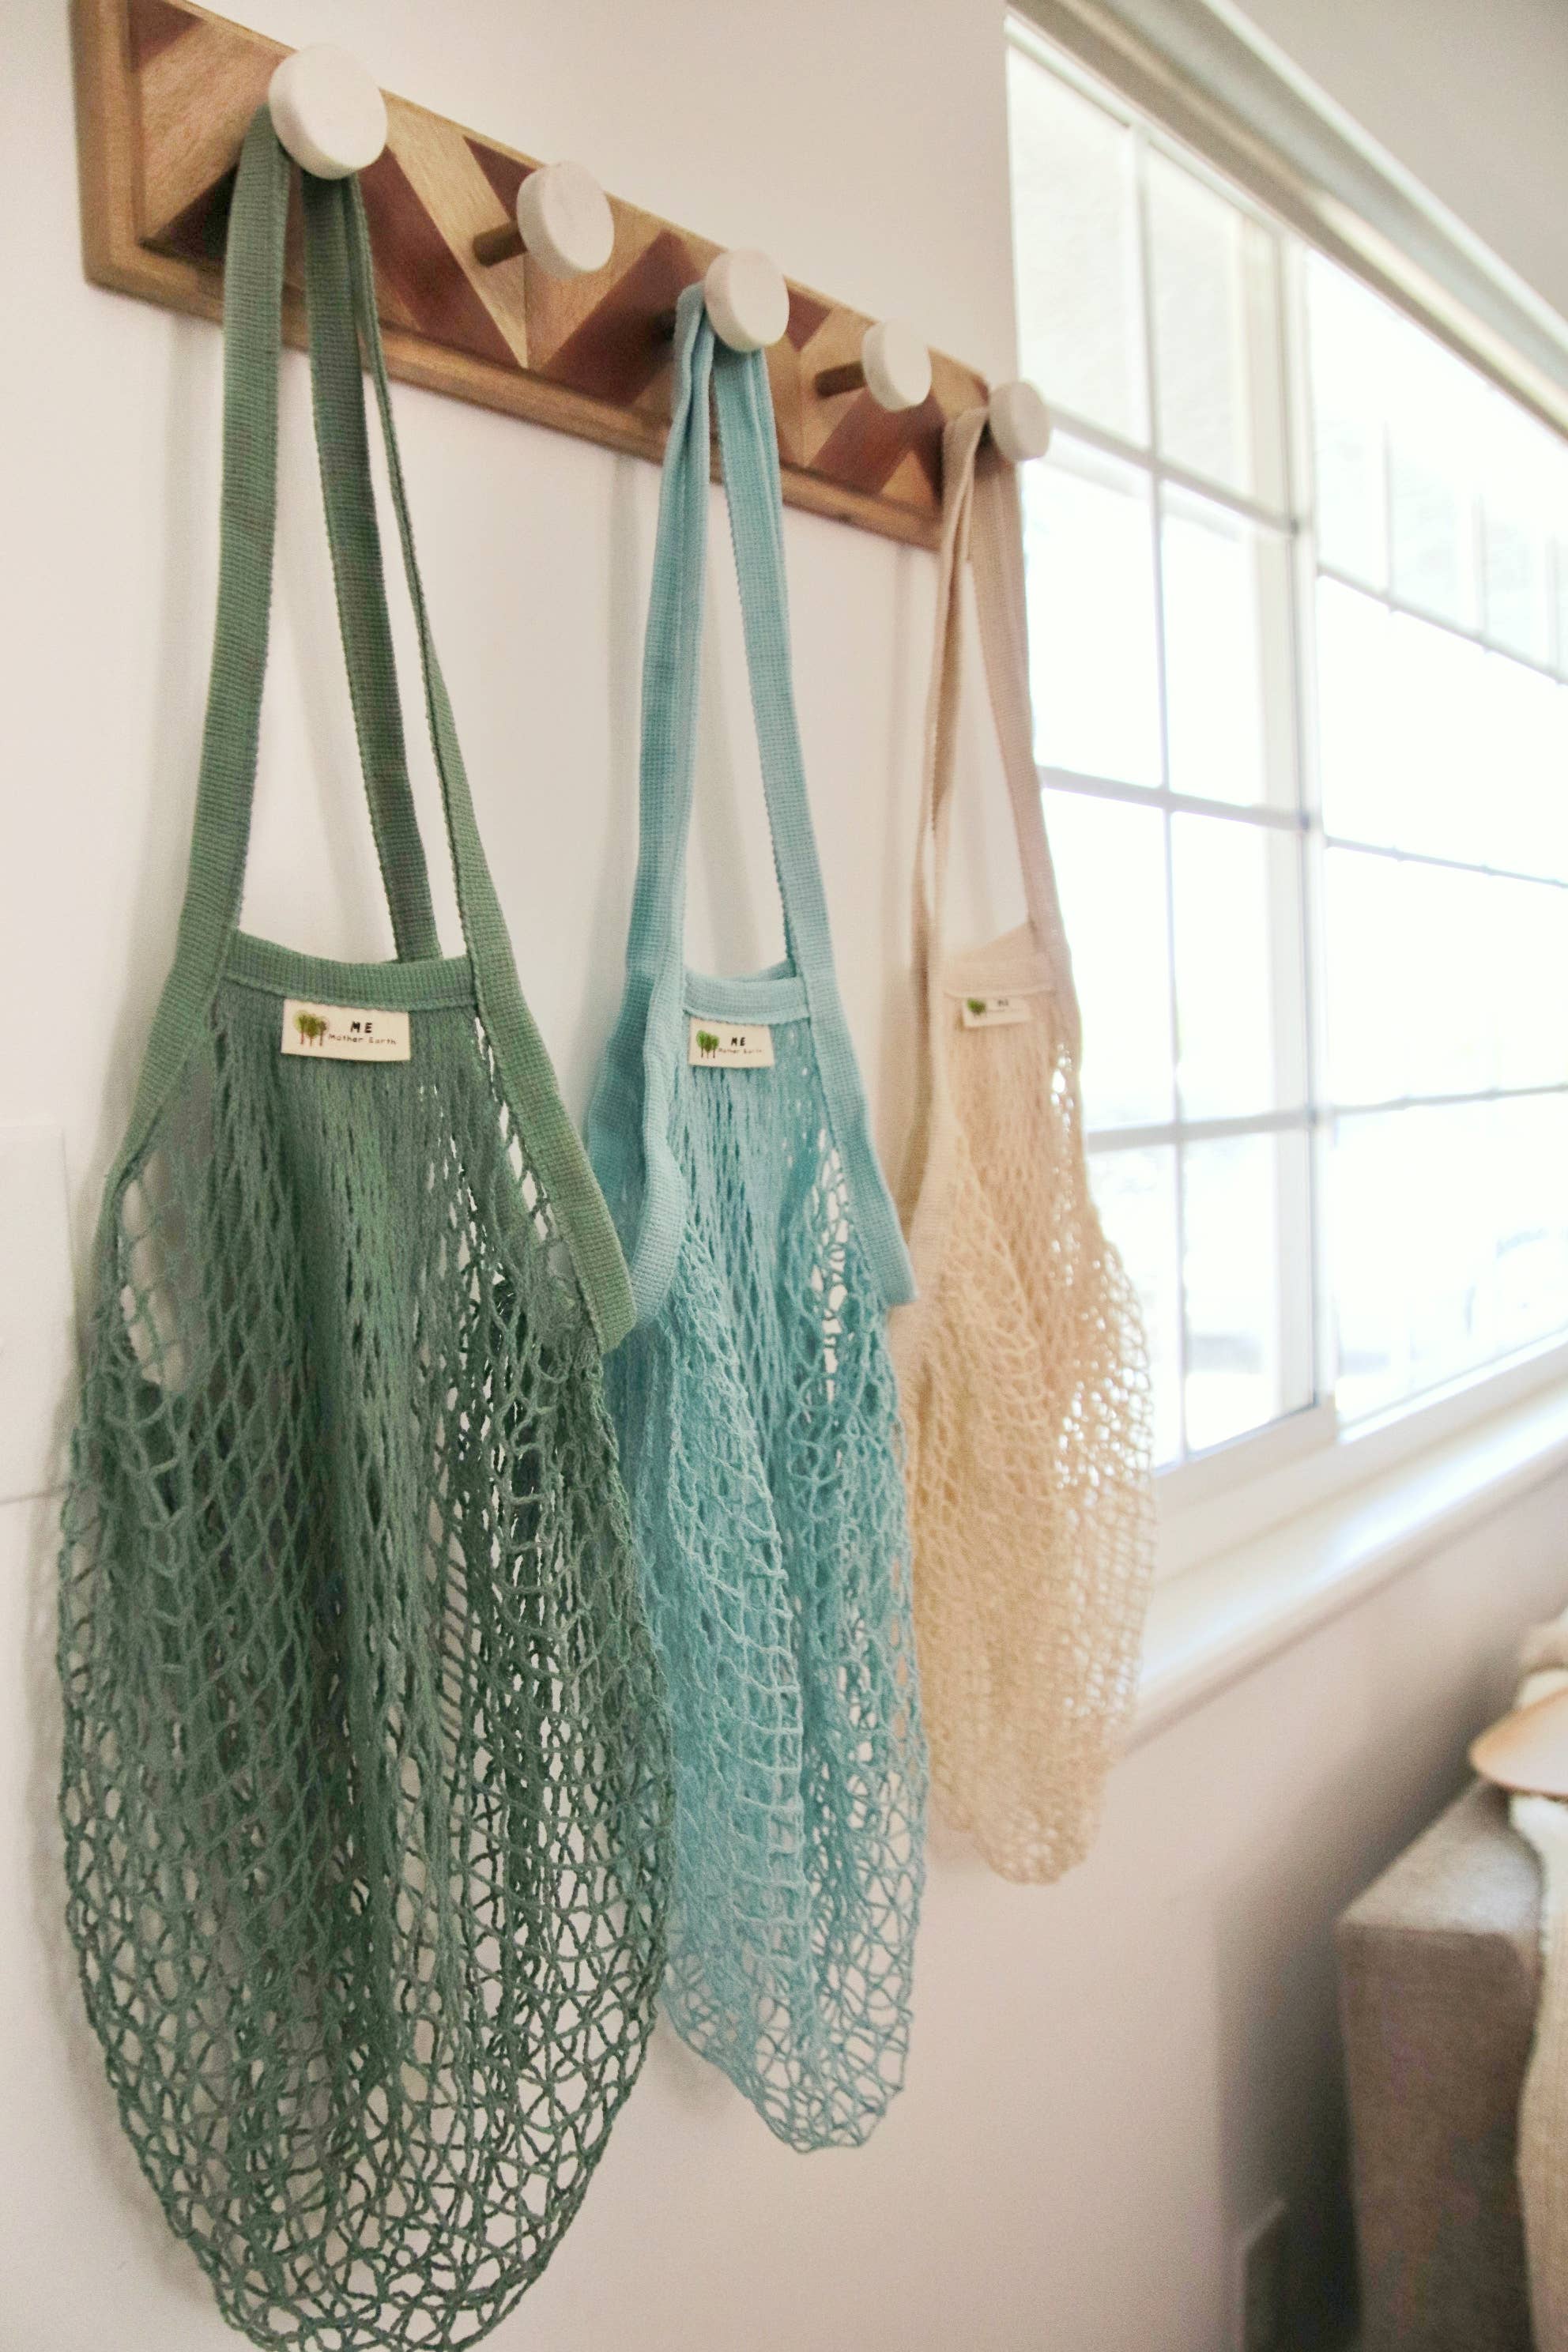 Me Mother Earth - The "One Tripper" HUGE Mesh Market Bag | Zero Waste: Natural